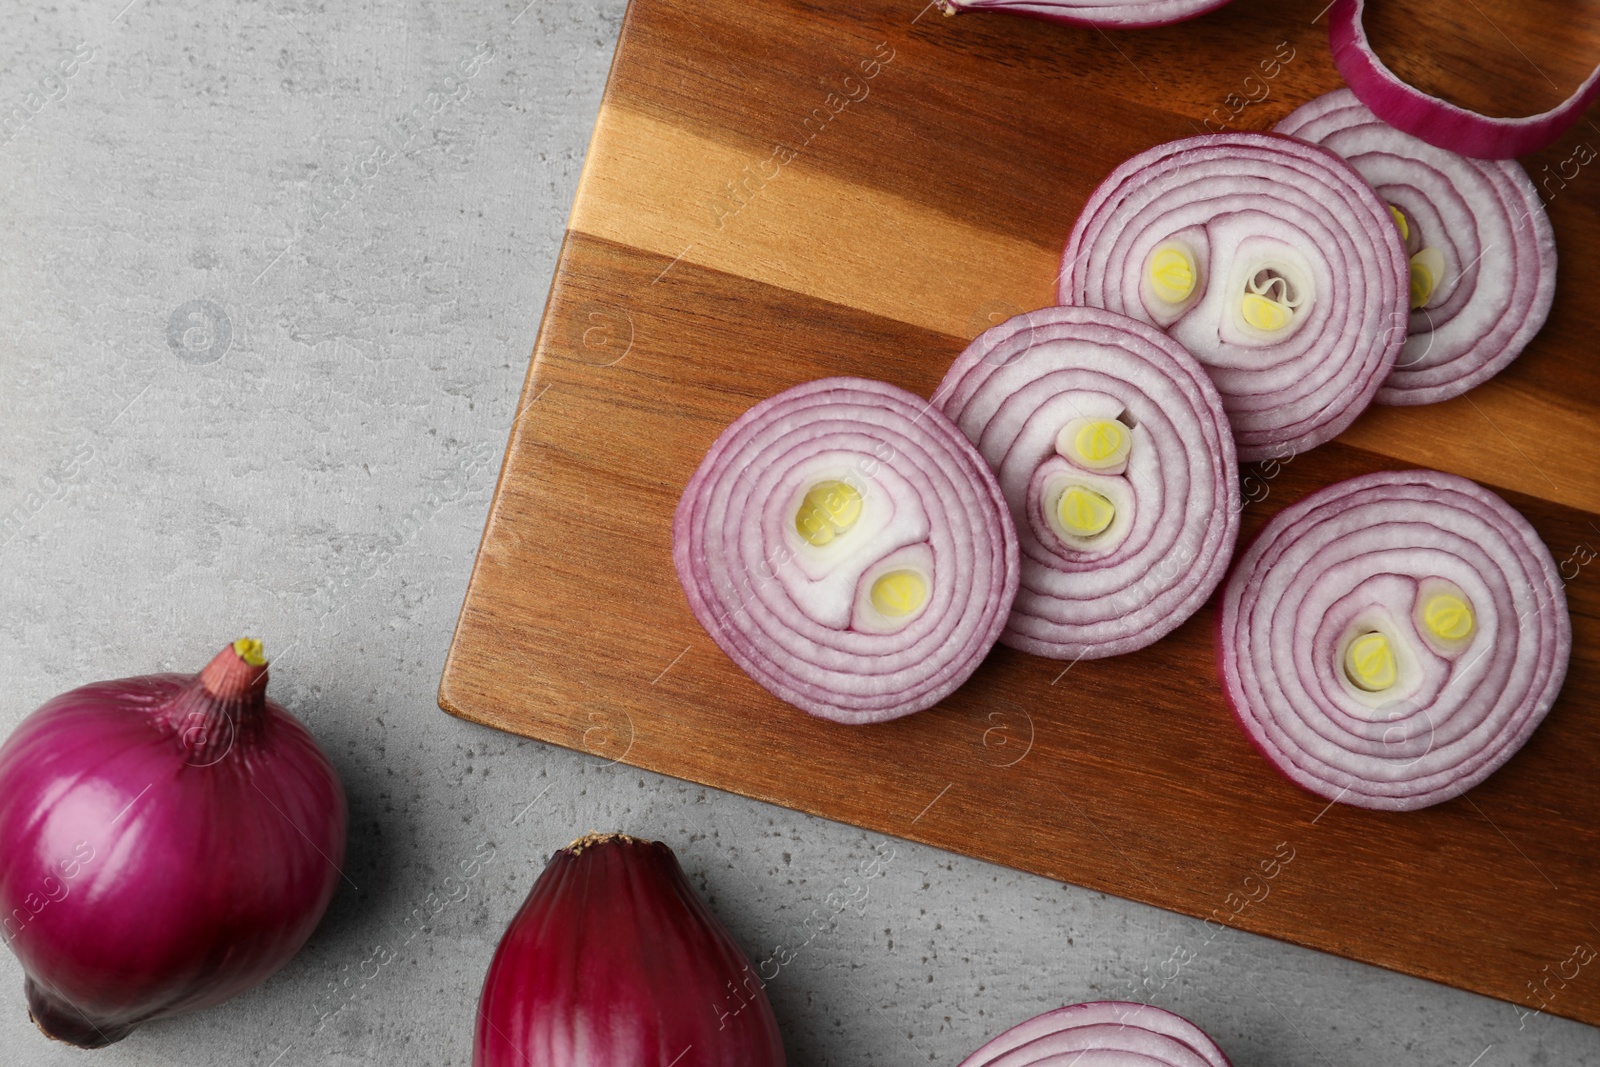 Photo of Red onion and wooden board on light grey table, flat lay